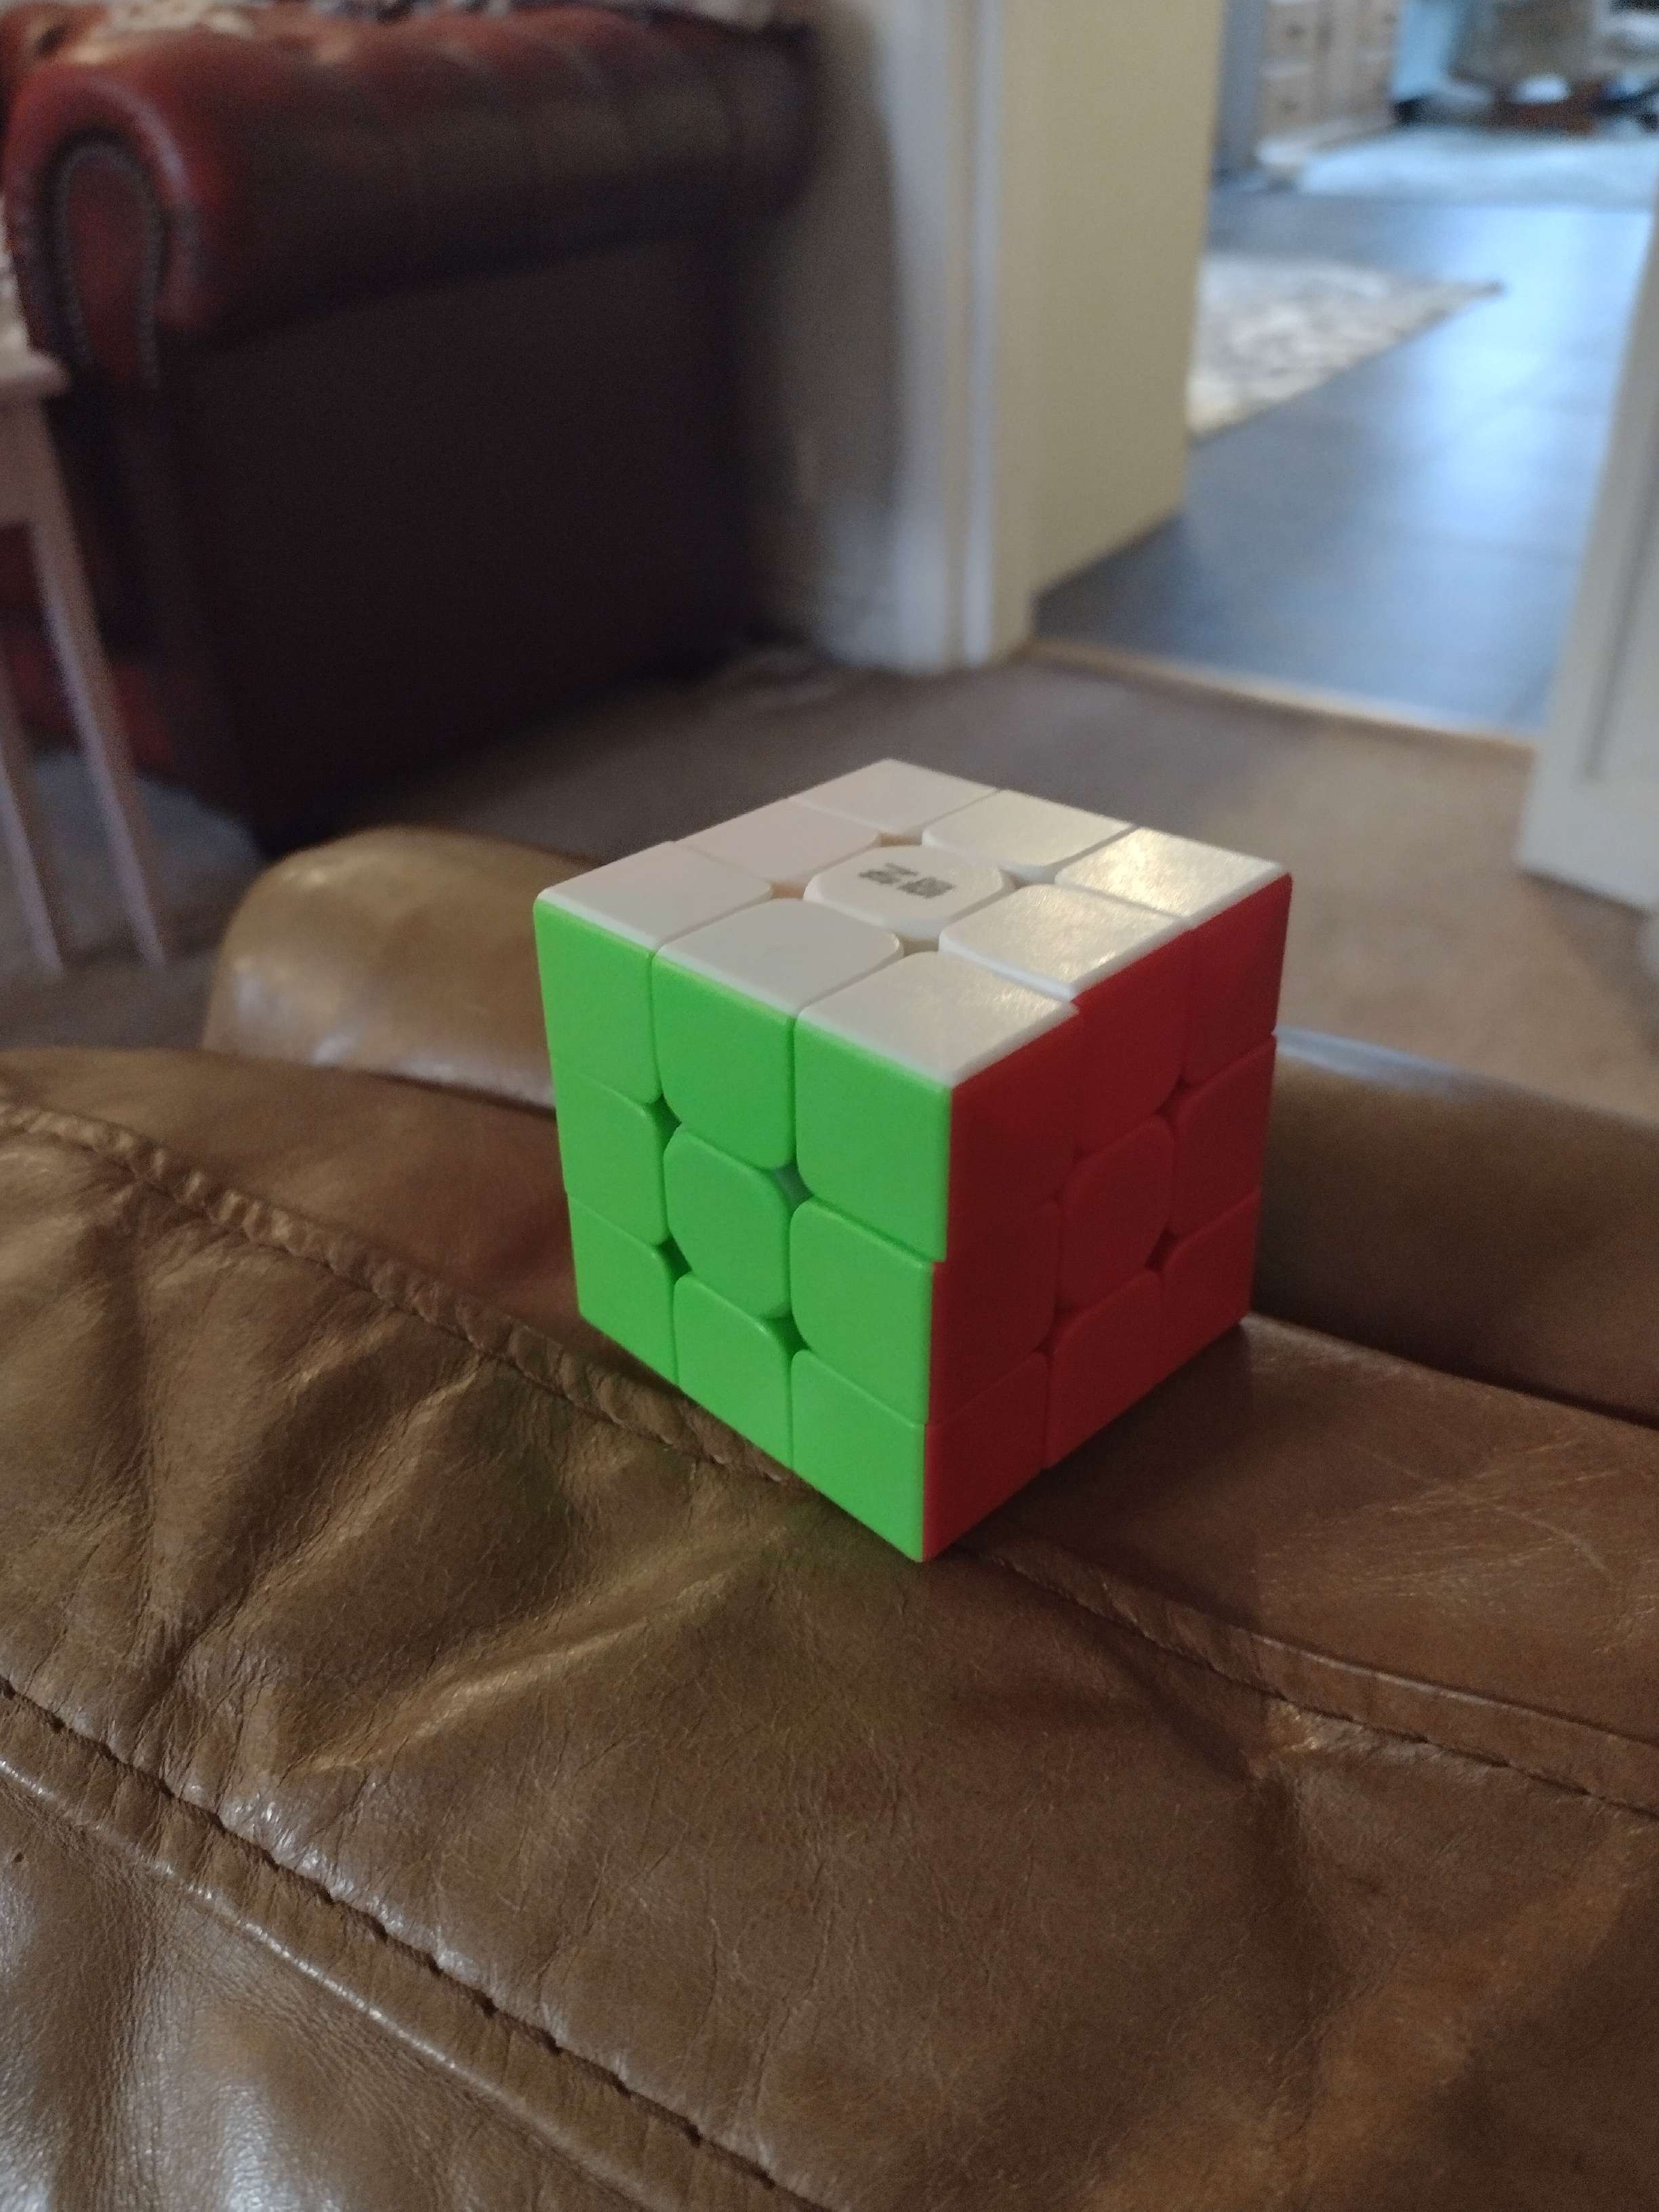 A solved rubik's cube